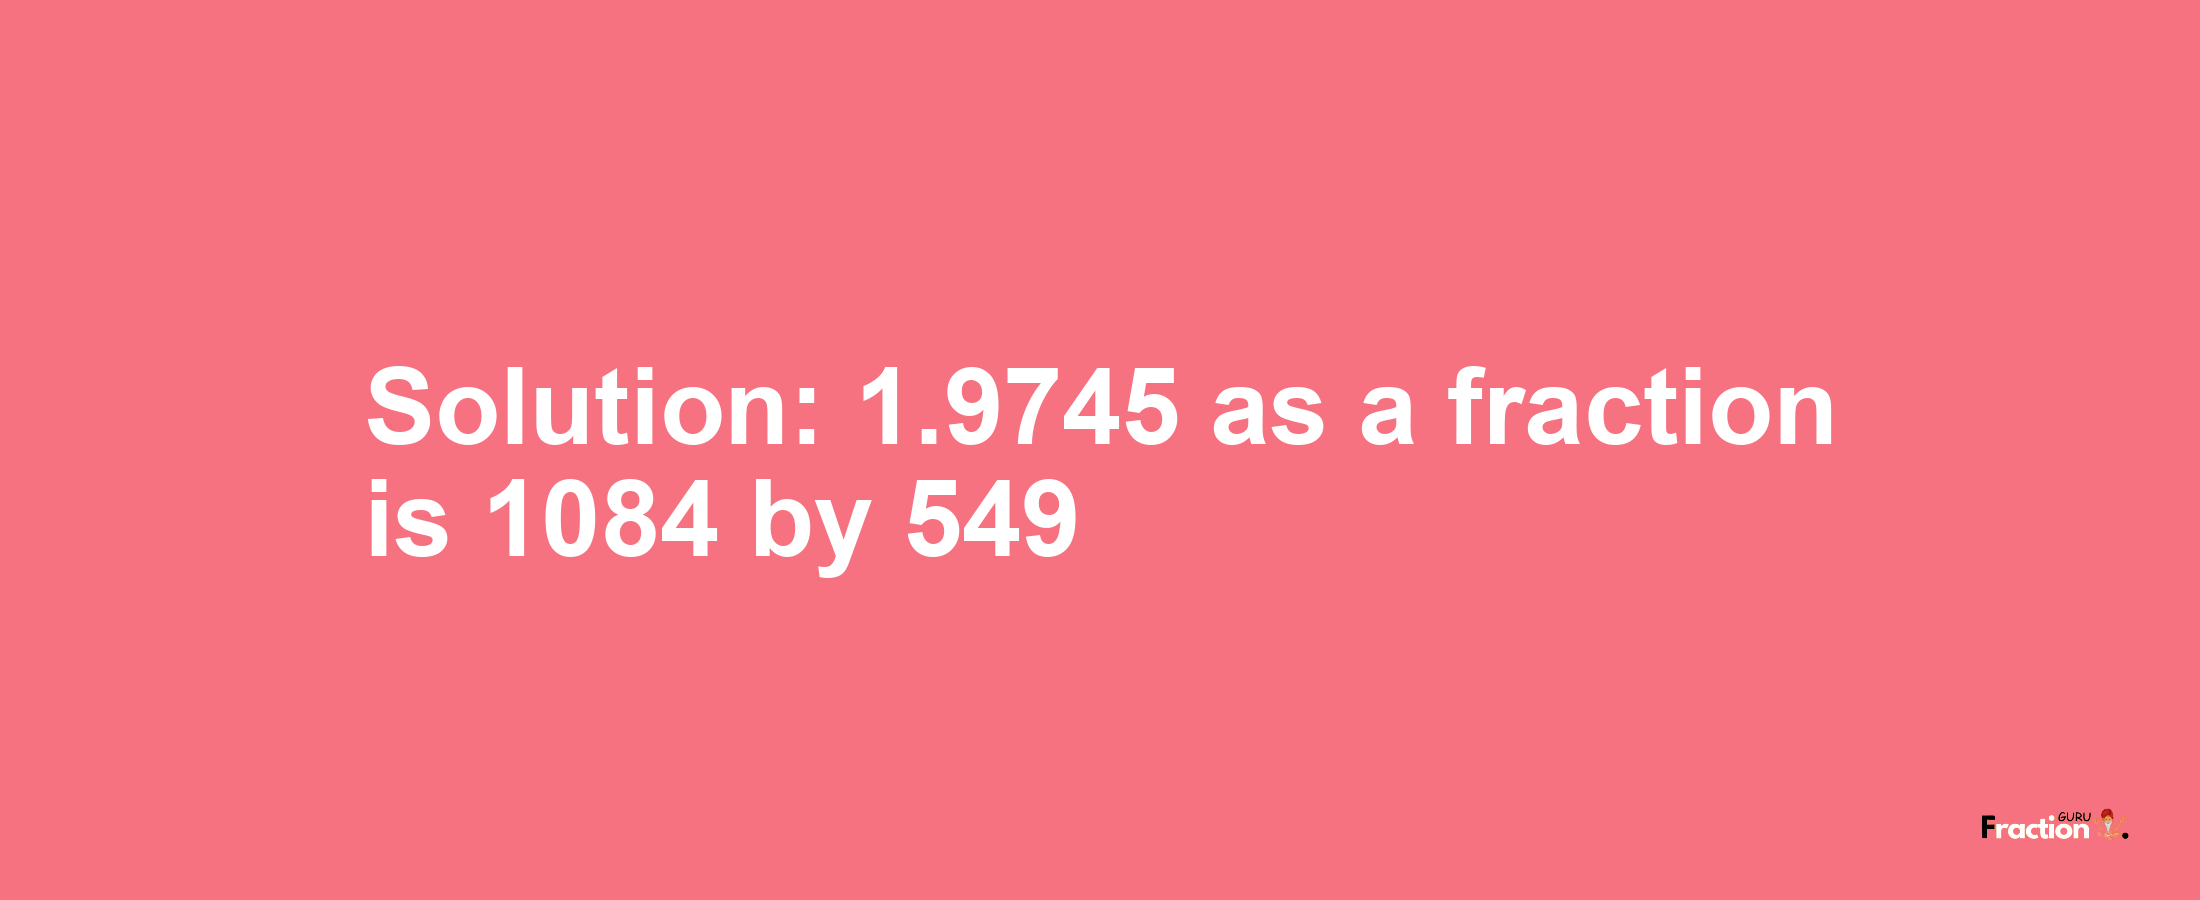 Solution:1.9745 as a fraction is 1084/549